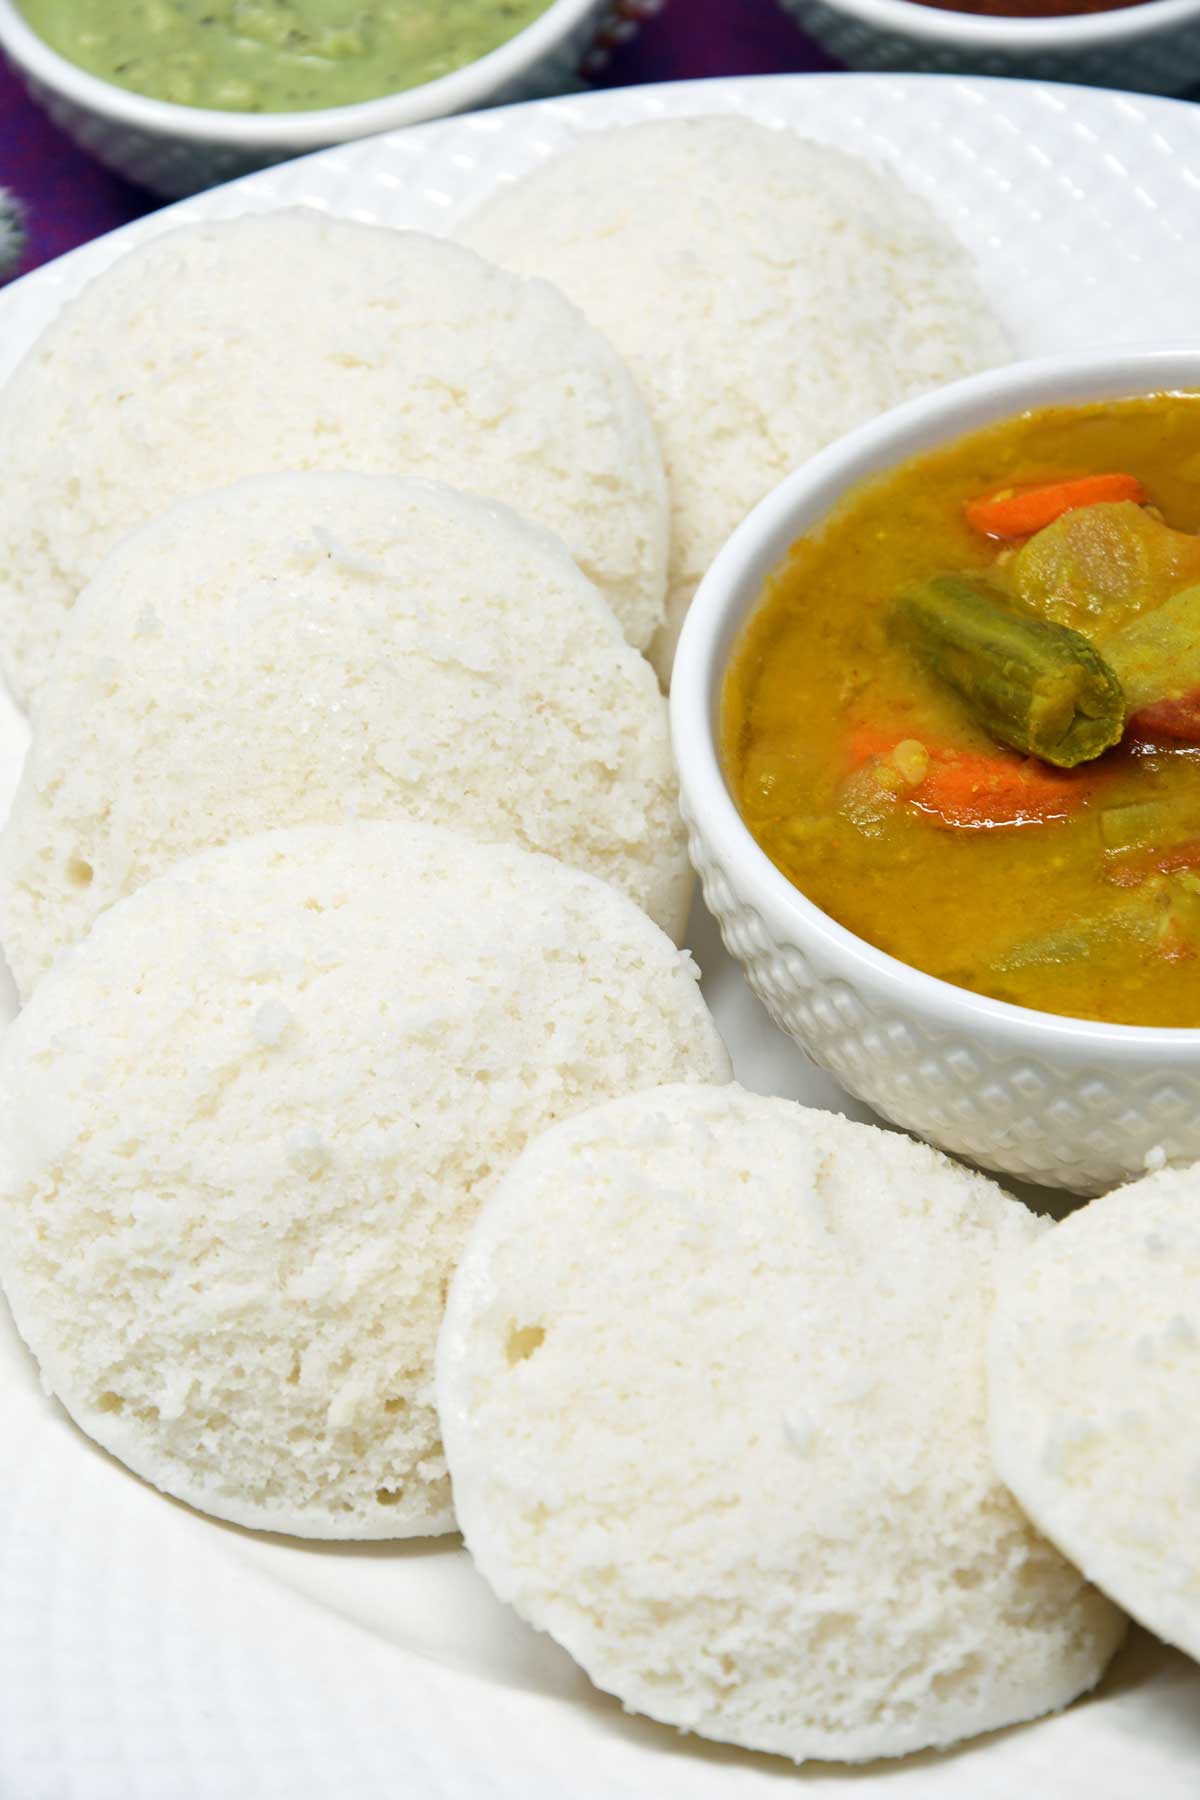 Idlis served in a plate with a bowl of sambhar and chutney.